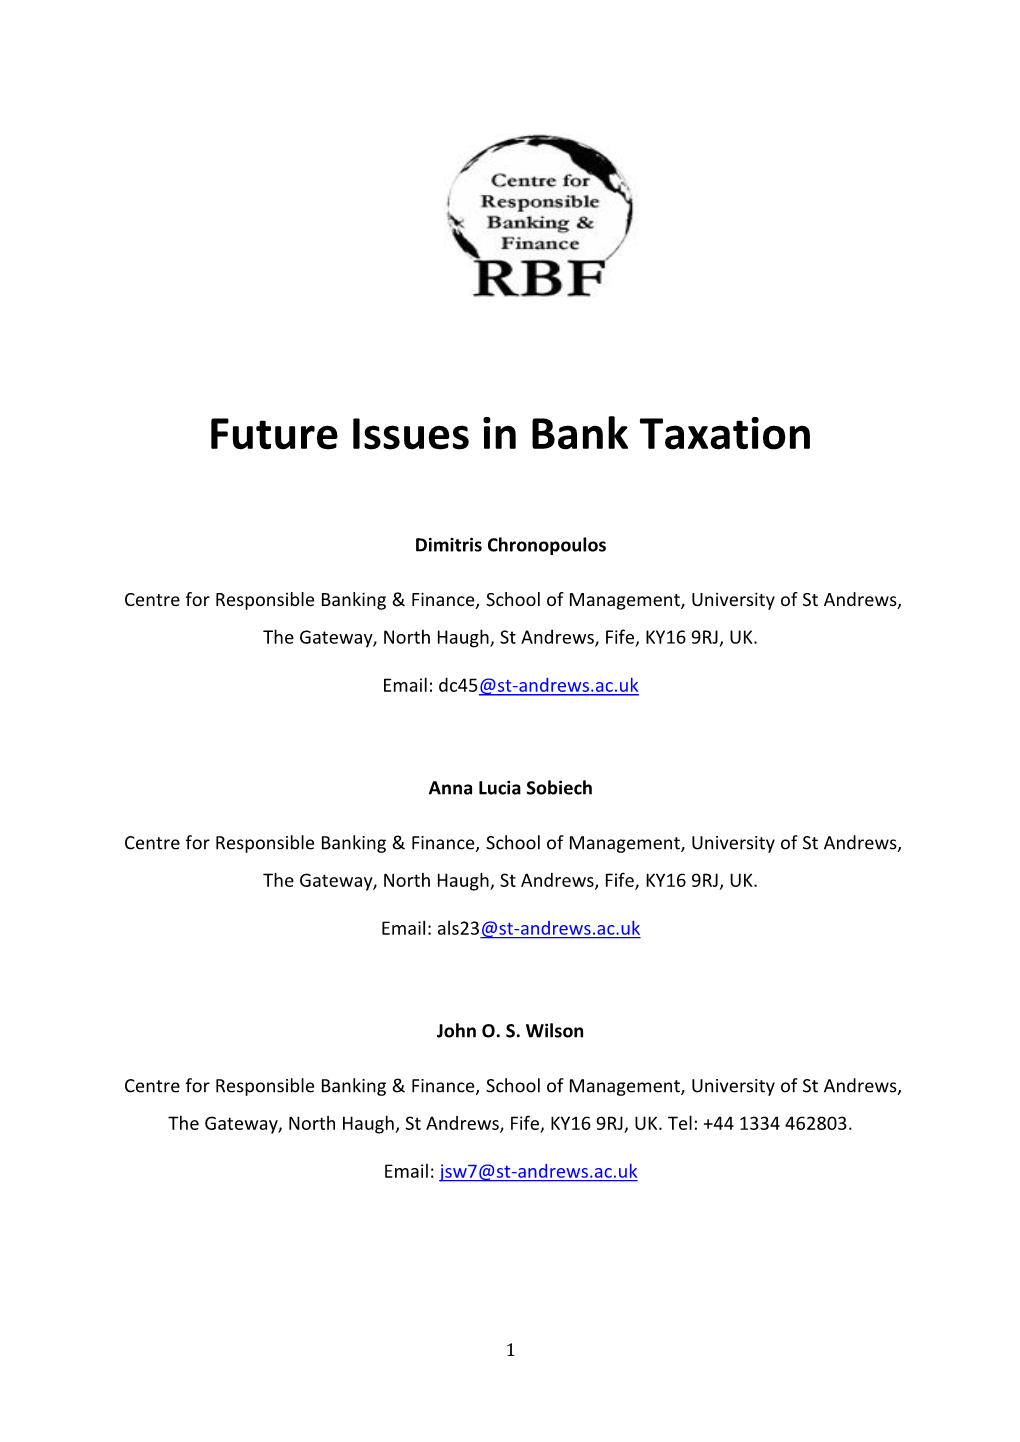 Future Issues in Bank Taxation